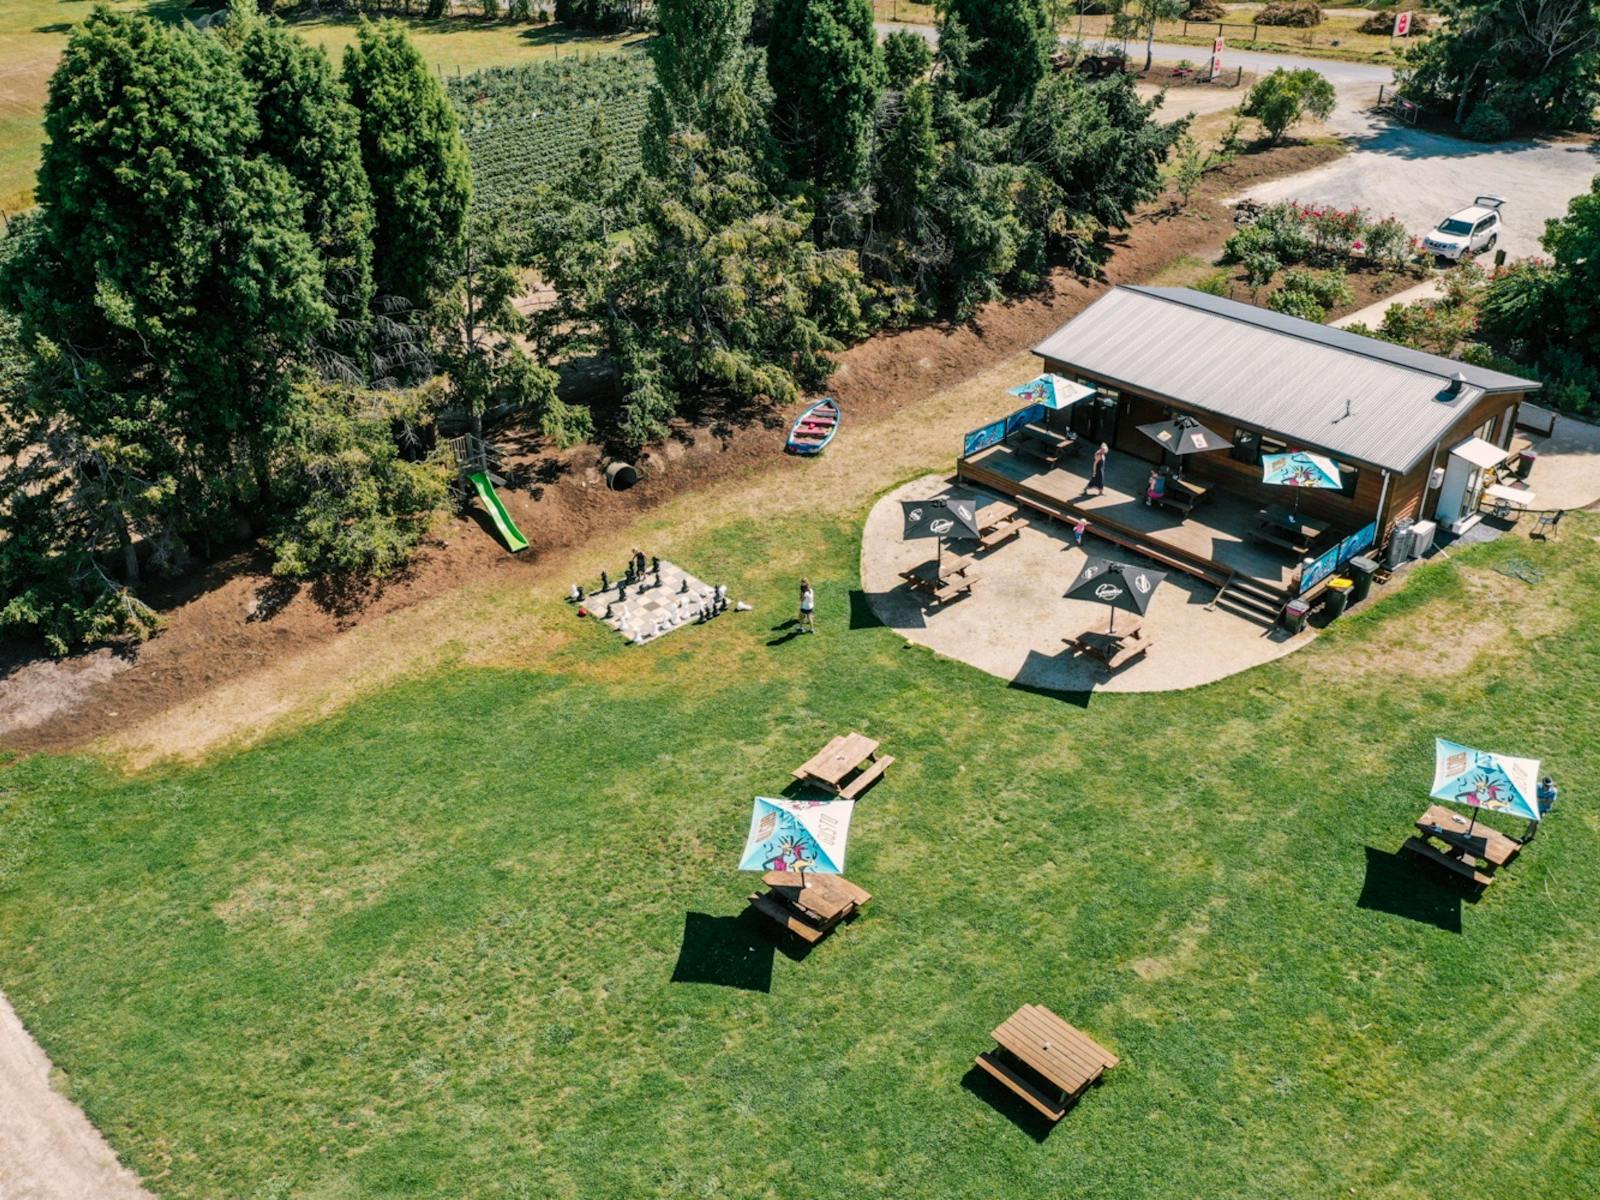 Overhead view of the cafe and picnic tables.